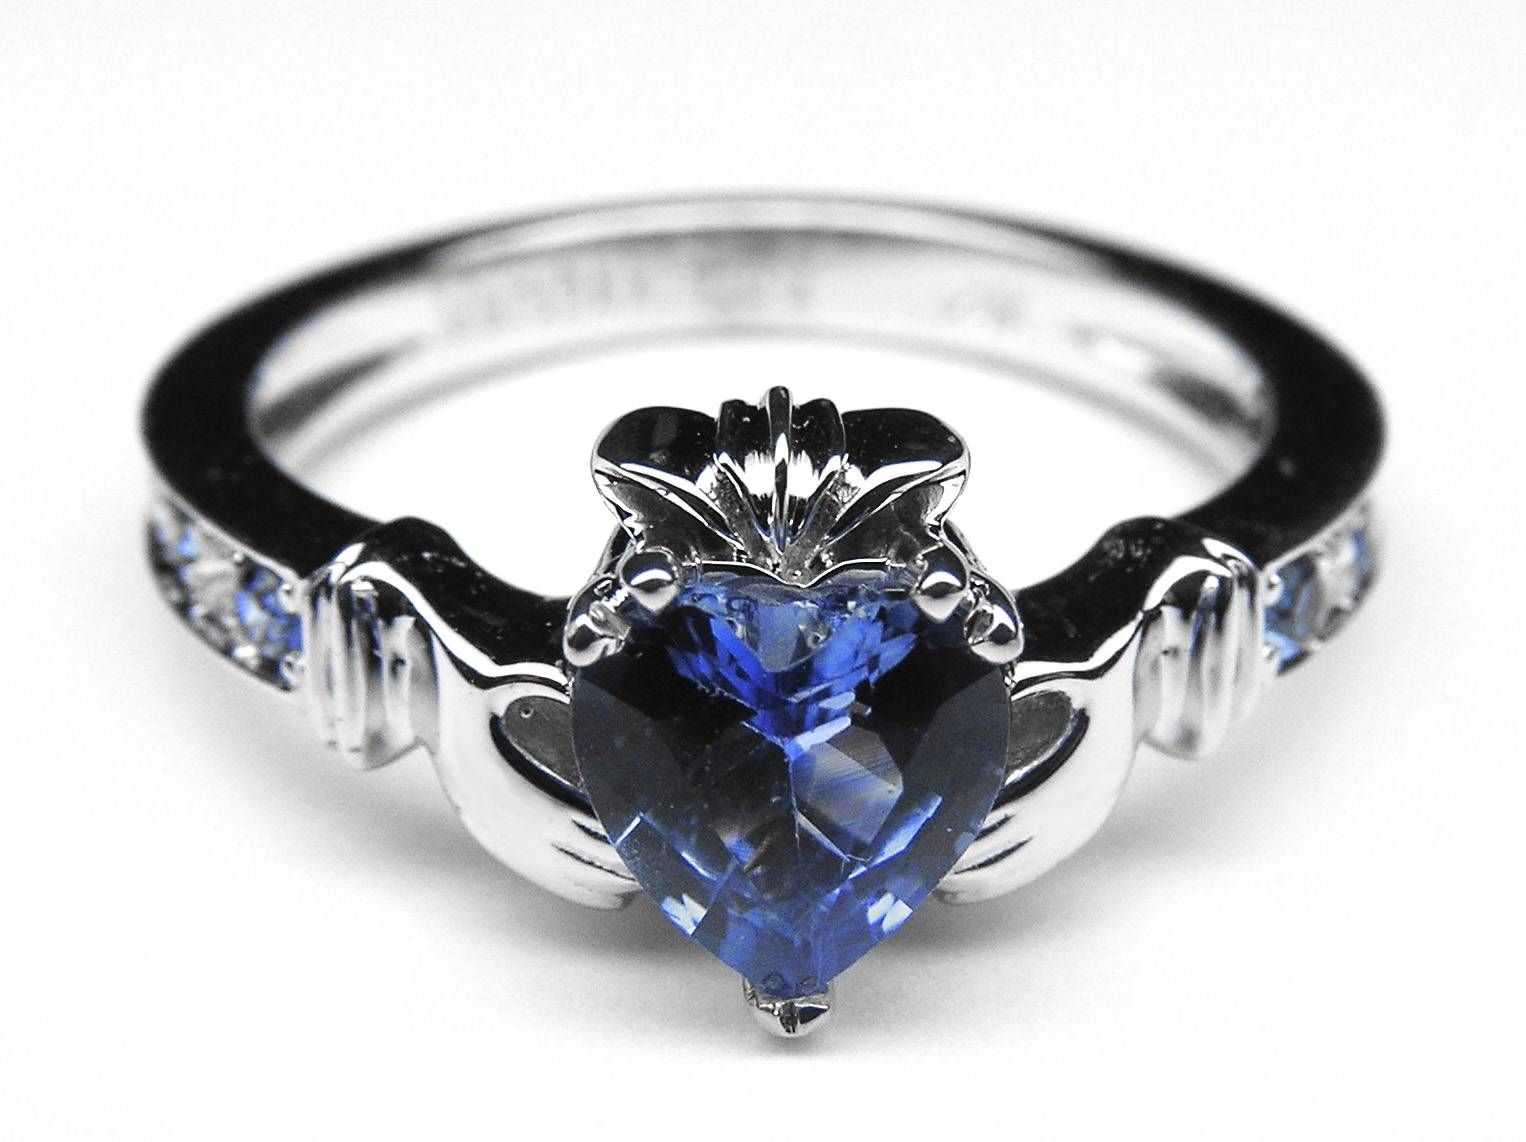 Claddagh – European Engagement Rings From Mdc Diamonds Nyc Intended For Claddagh Rings Engagement Diamond (View 7 of 15)